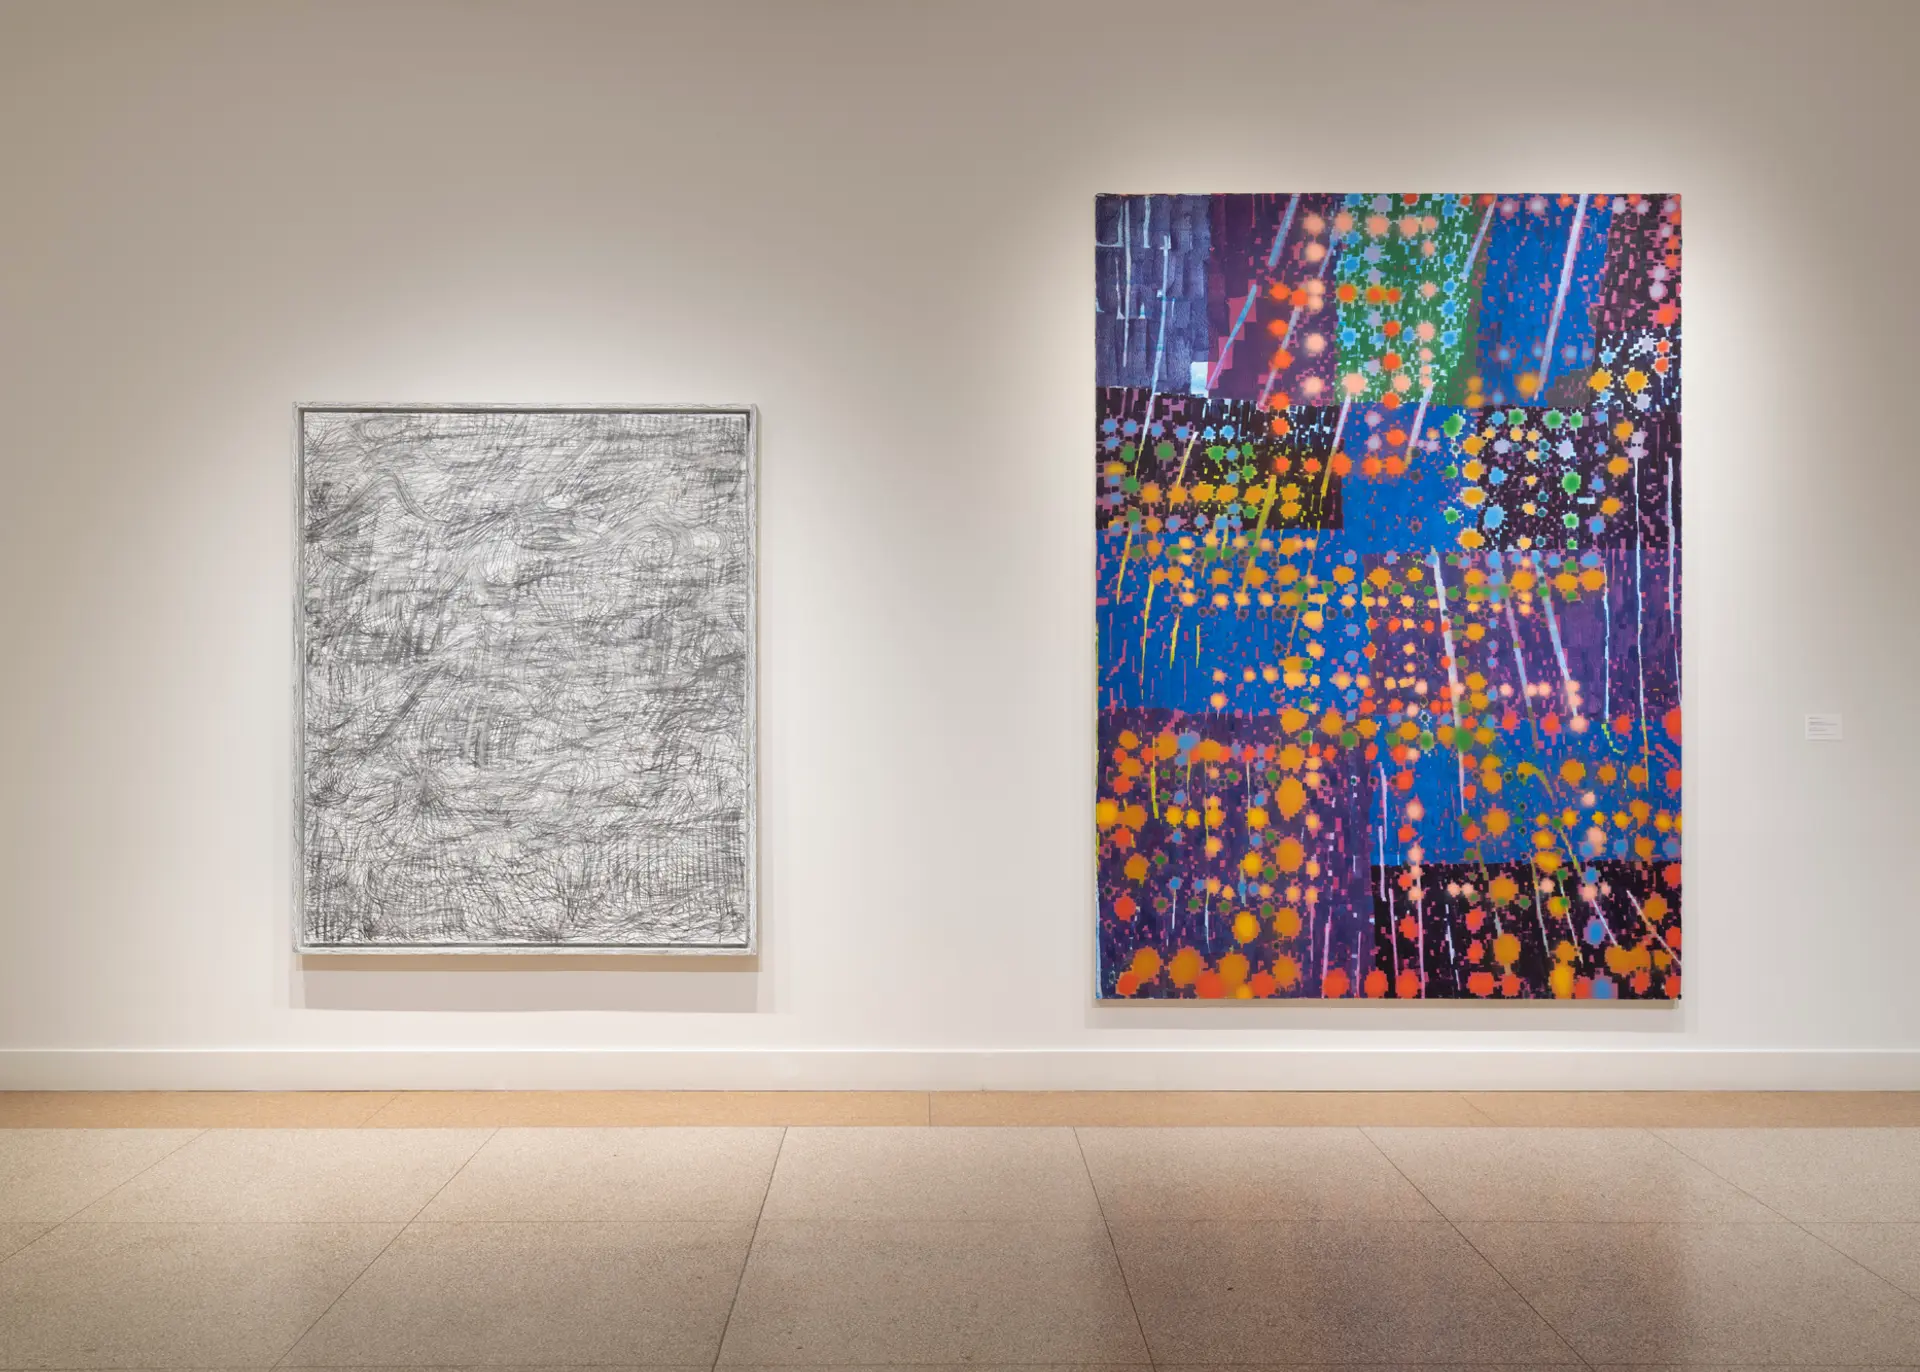 Two large paintings, one gray and the other an assortment of colors, hang mounted on a wall.